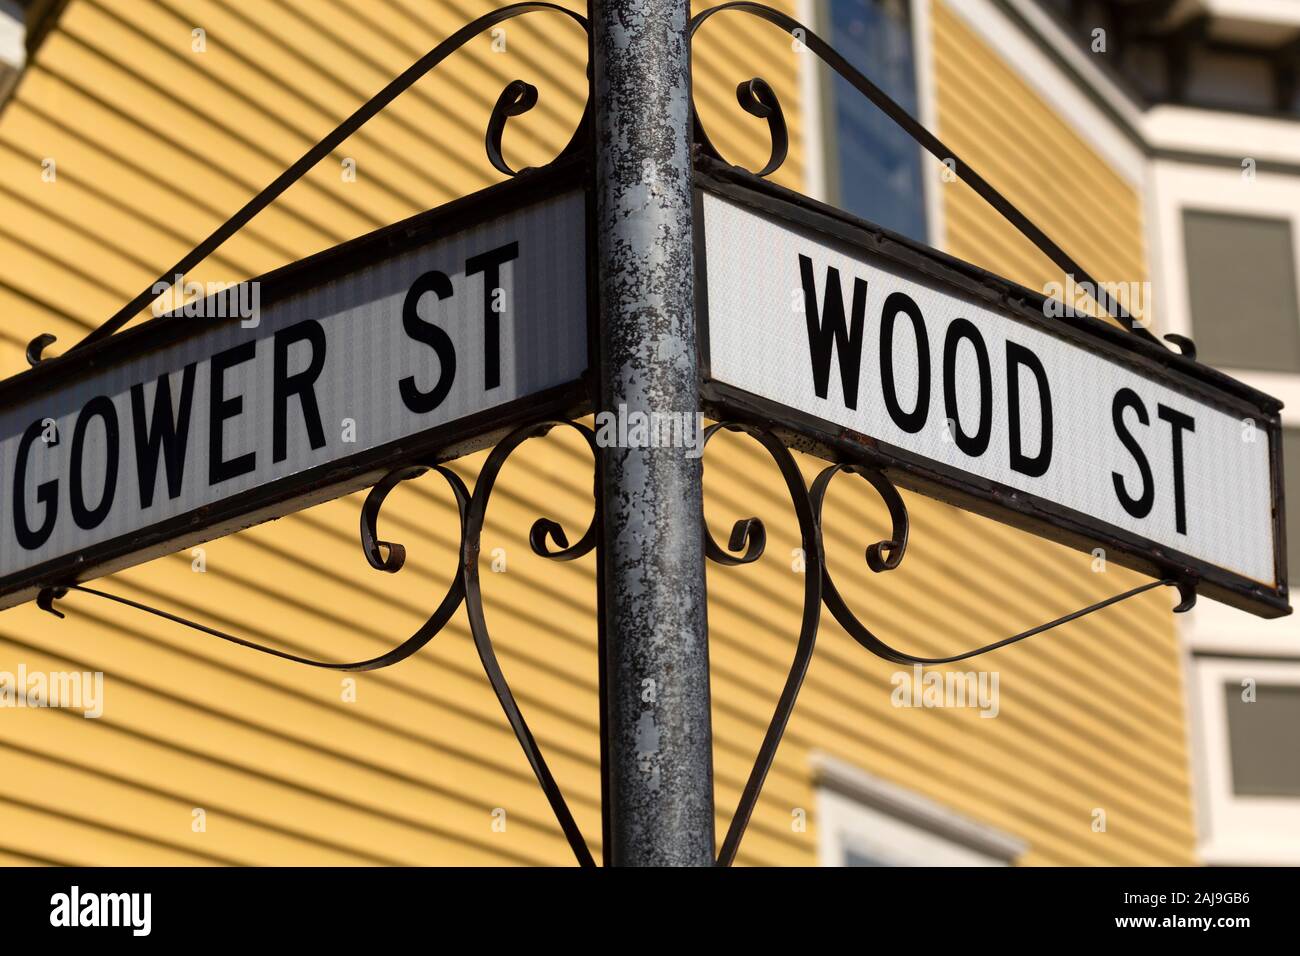 Sign for Gower Street and Wood Street in St John's, Newfoundland and Labrador, Canada. The sign is held by wrought iron. Stock Photo